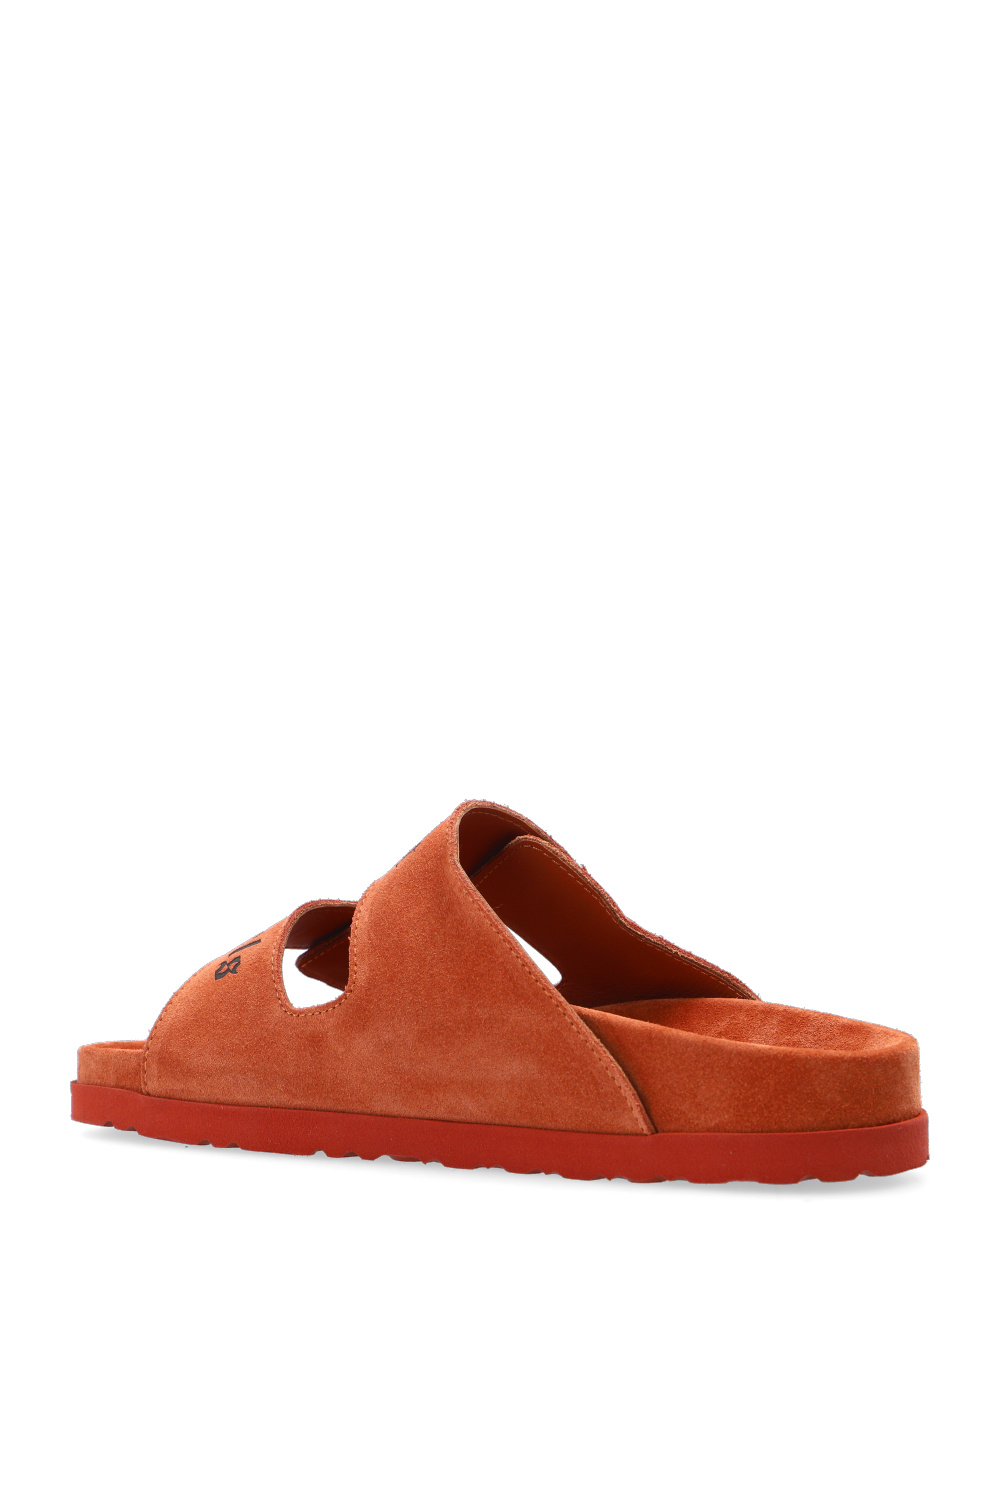 Benny Leather Palm Women Leather Cross Pam Palm Slippers - Brown